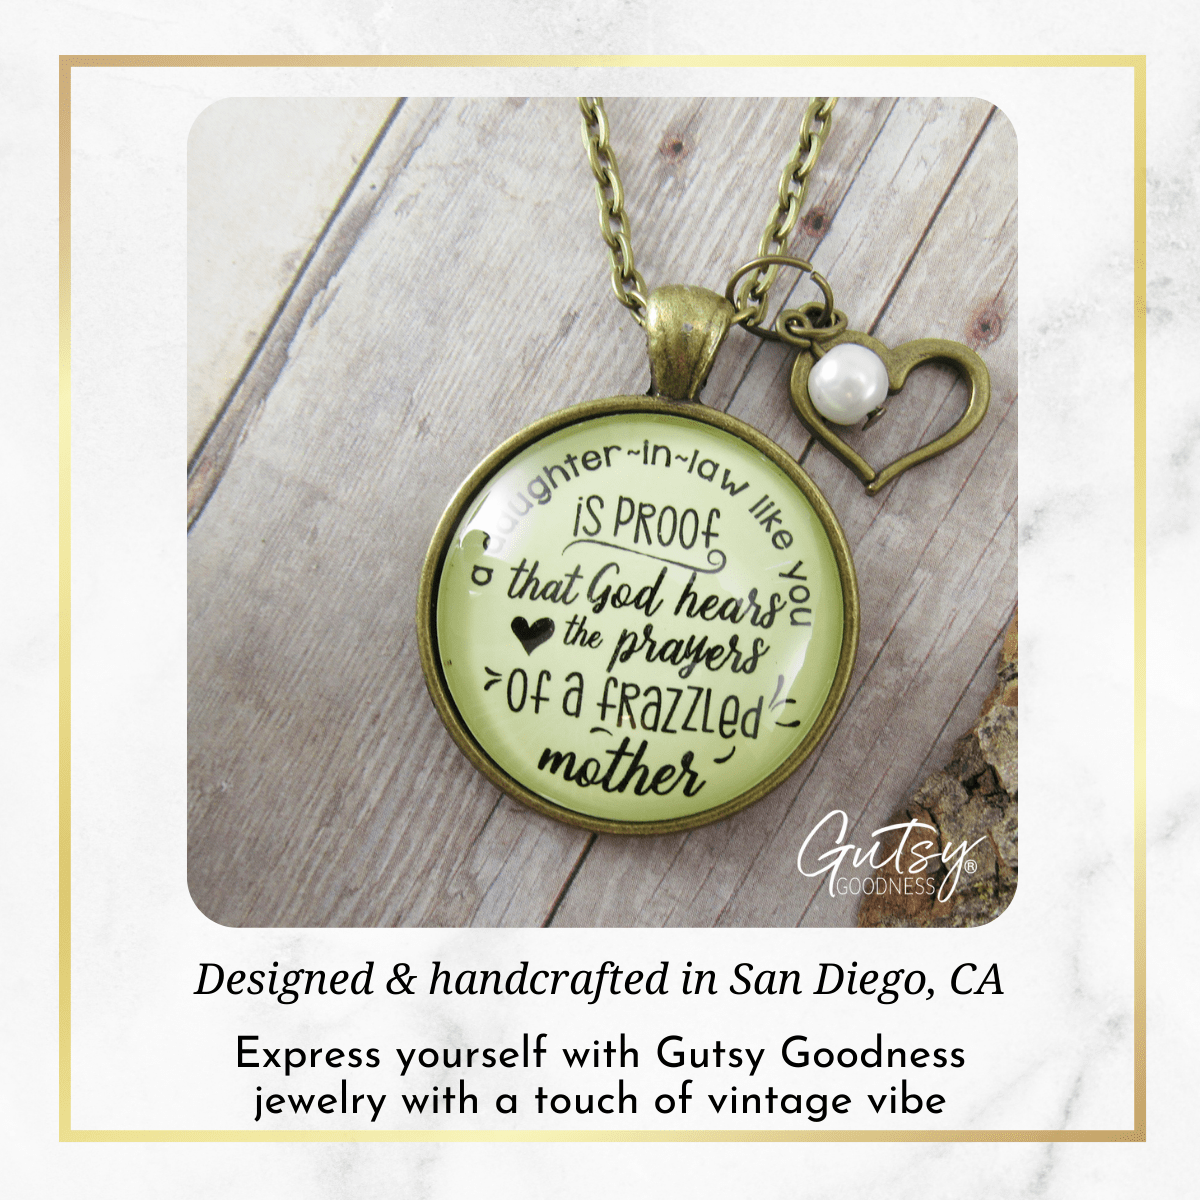 Gutsy Goodness Daughter in Law Gift Necklace Proof God Hears Prayers Wedding Jewelry Gift - Gutsy Goodness;Daughter In Law Gift Necklace Proof God Hears Prayers Wedding Jewelry Gift - Gutsy Goodness Handmade Jewelry Gifts